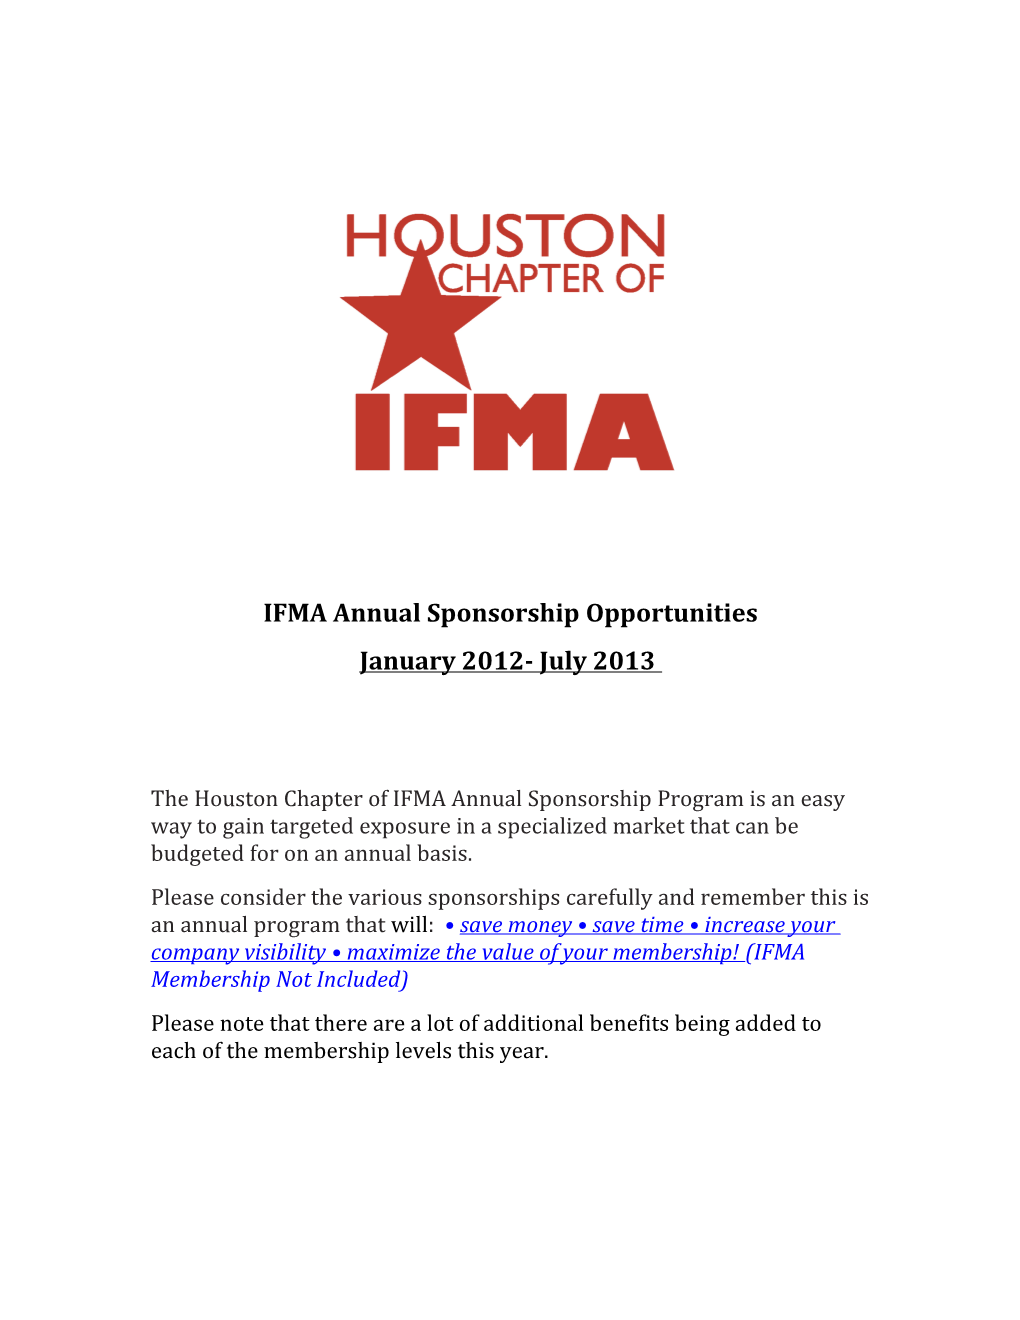 IFMA Annual Sponsorship Opportunities